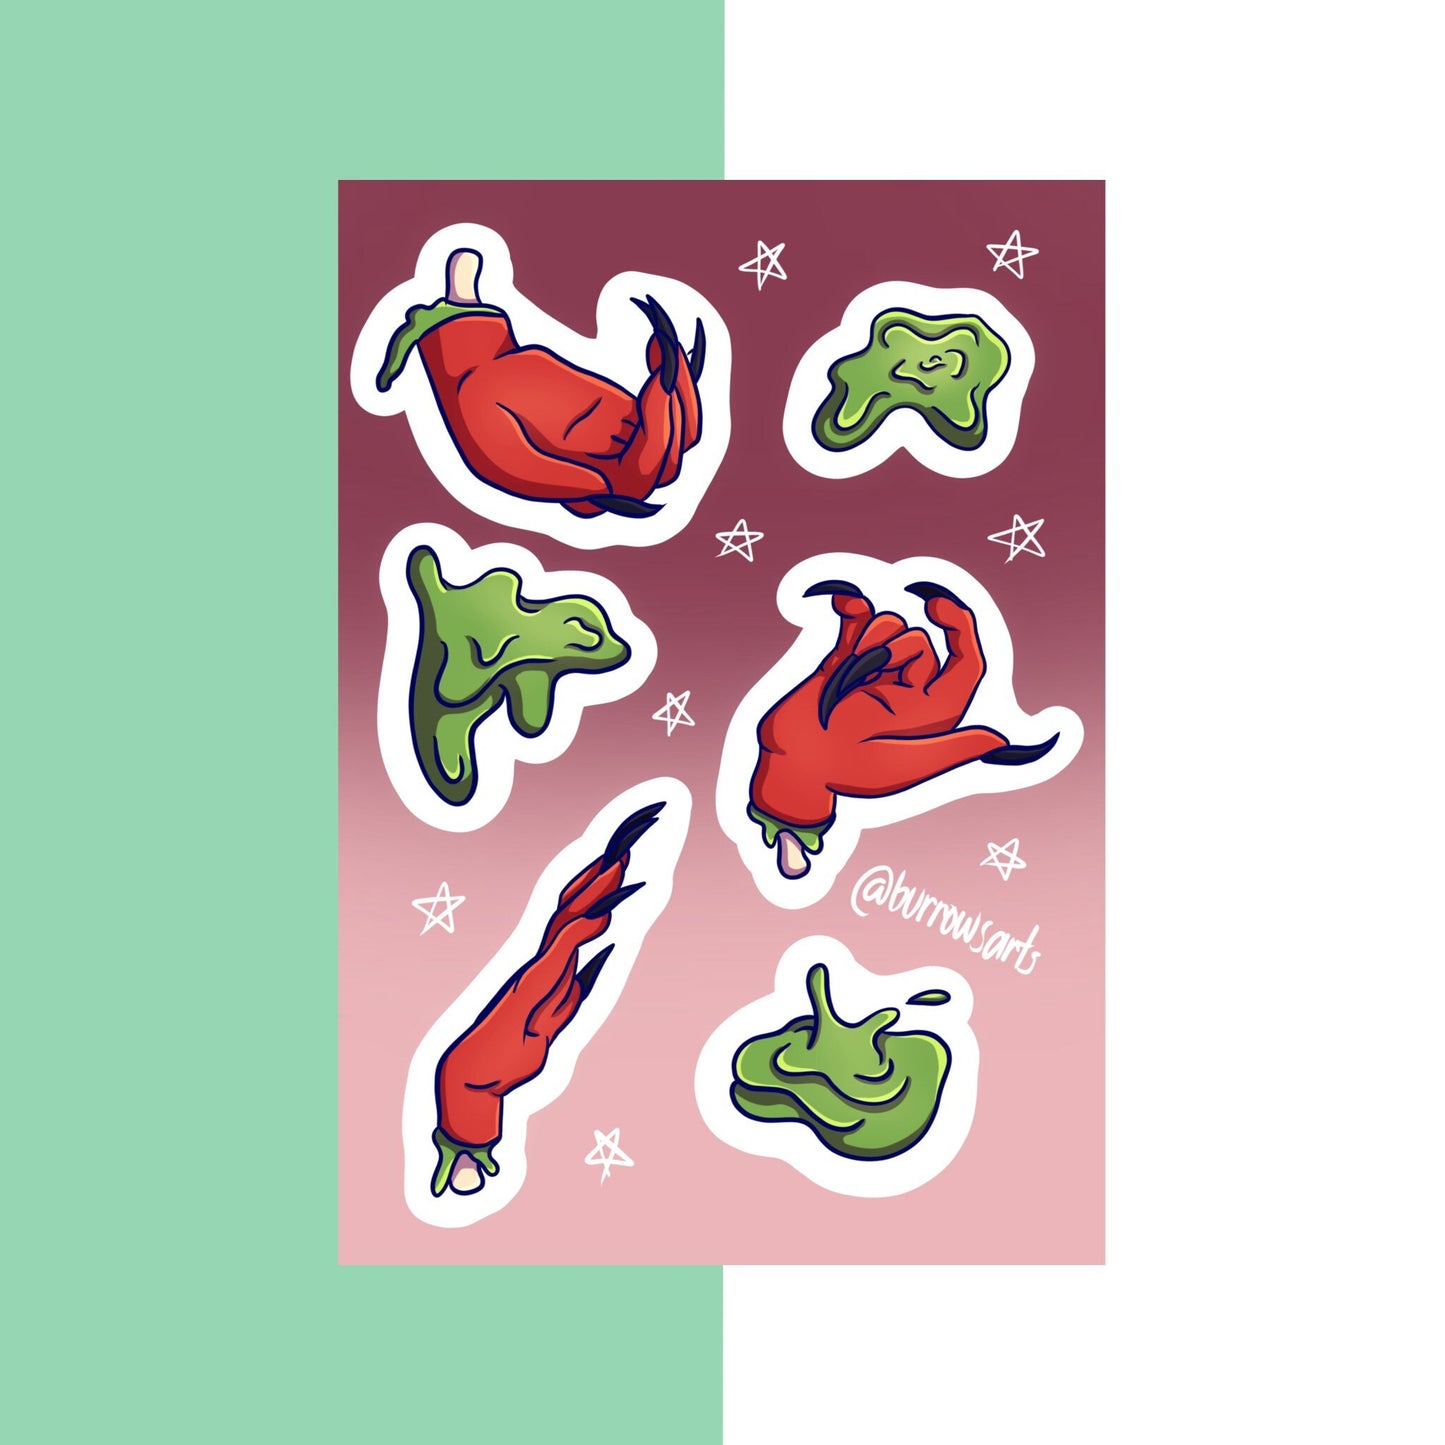 Imps Hands and Ooze - Sticker Sheet